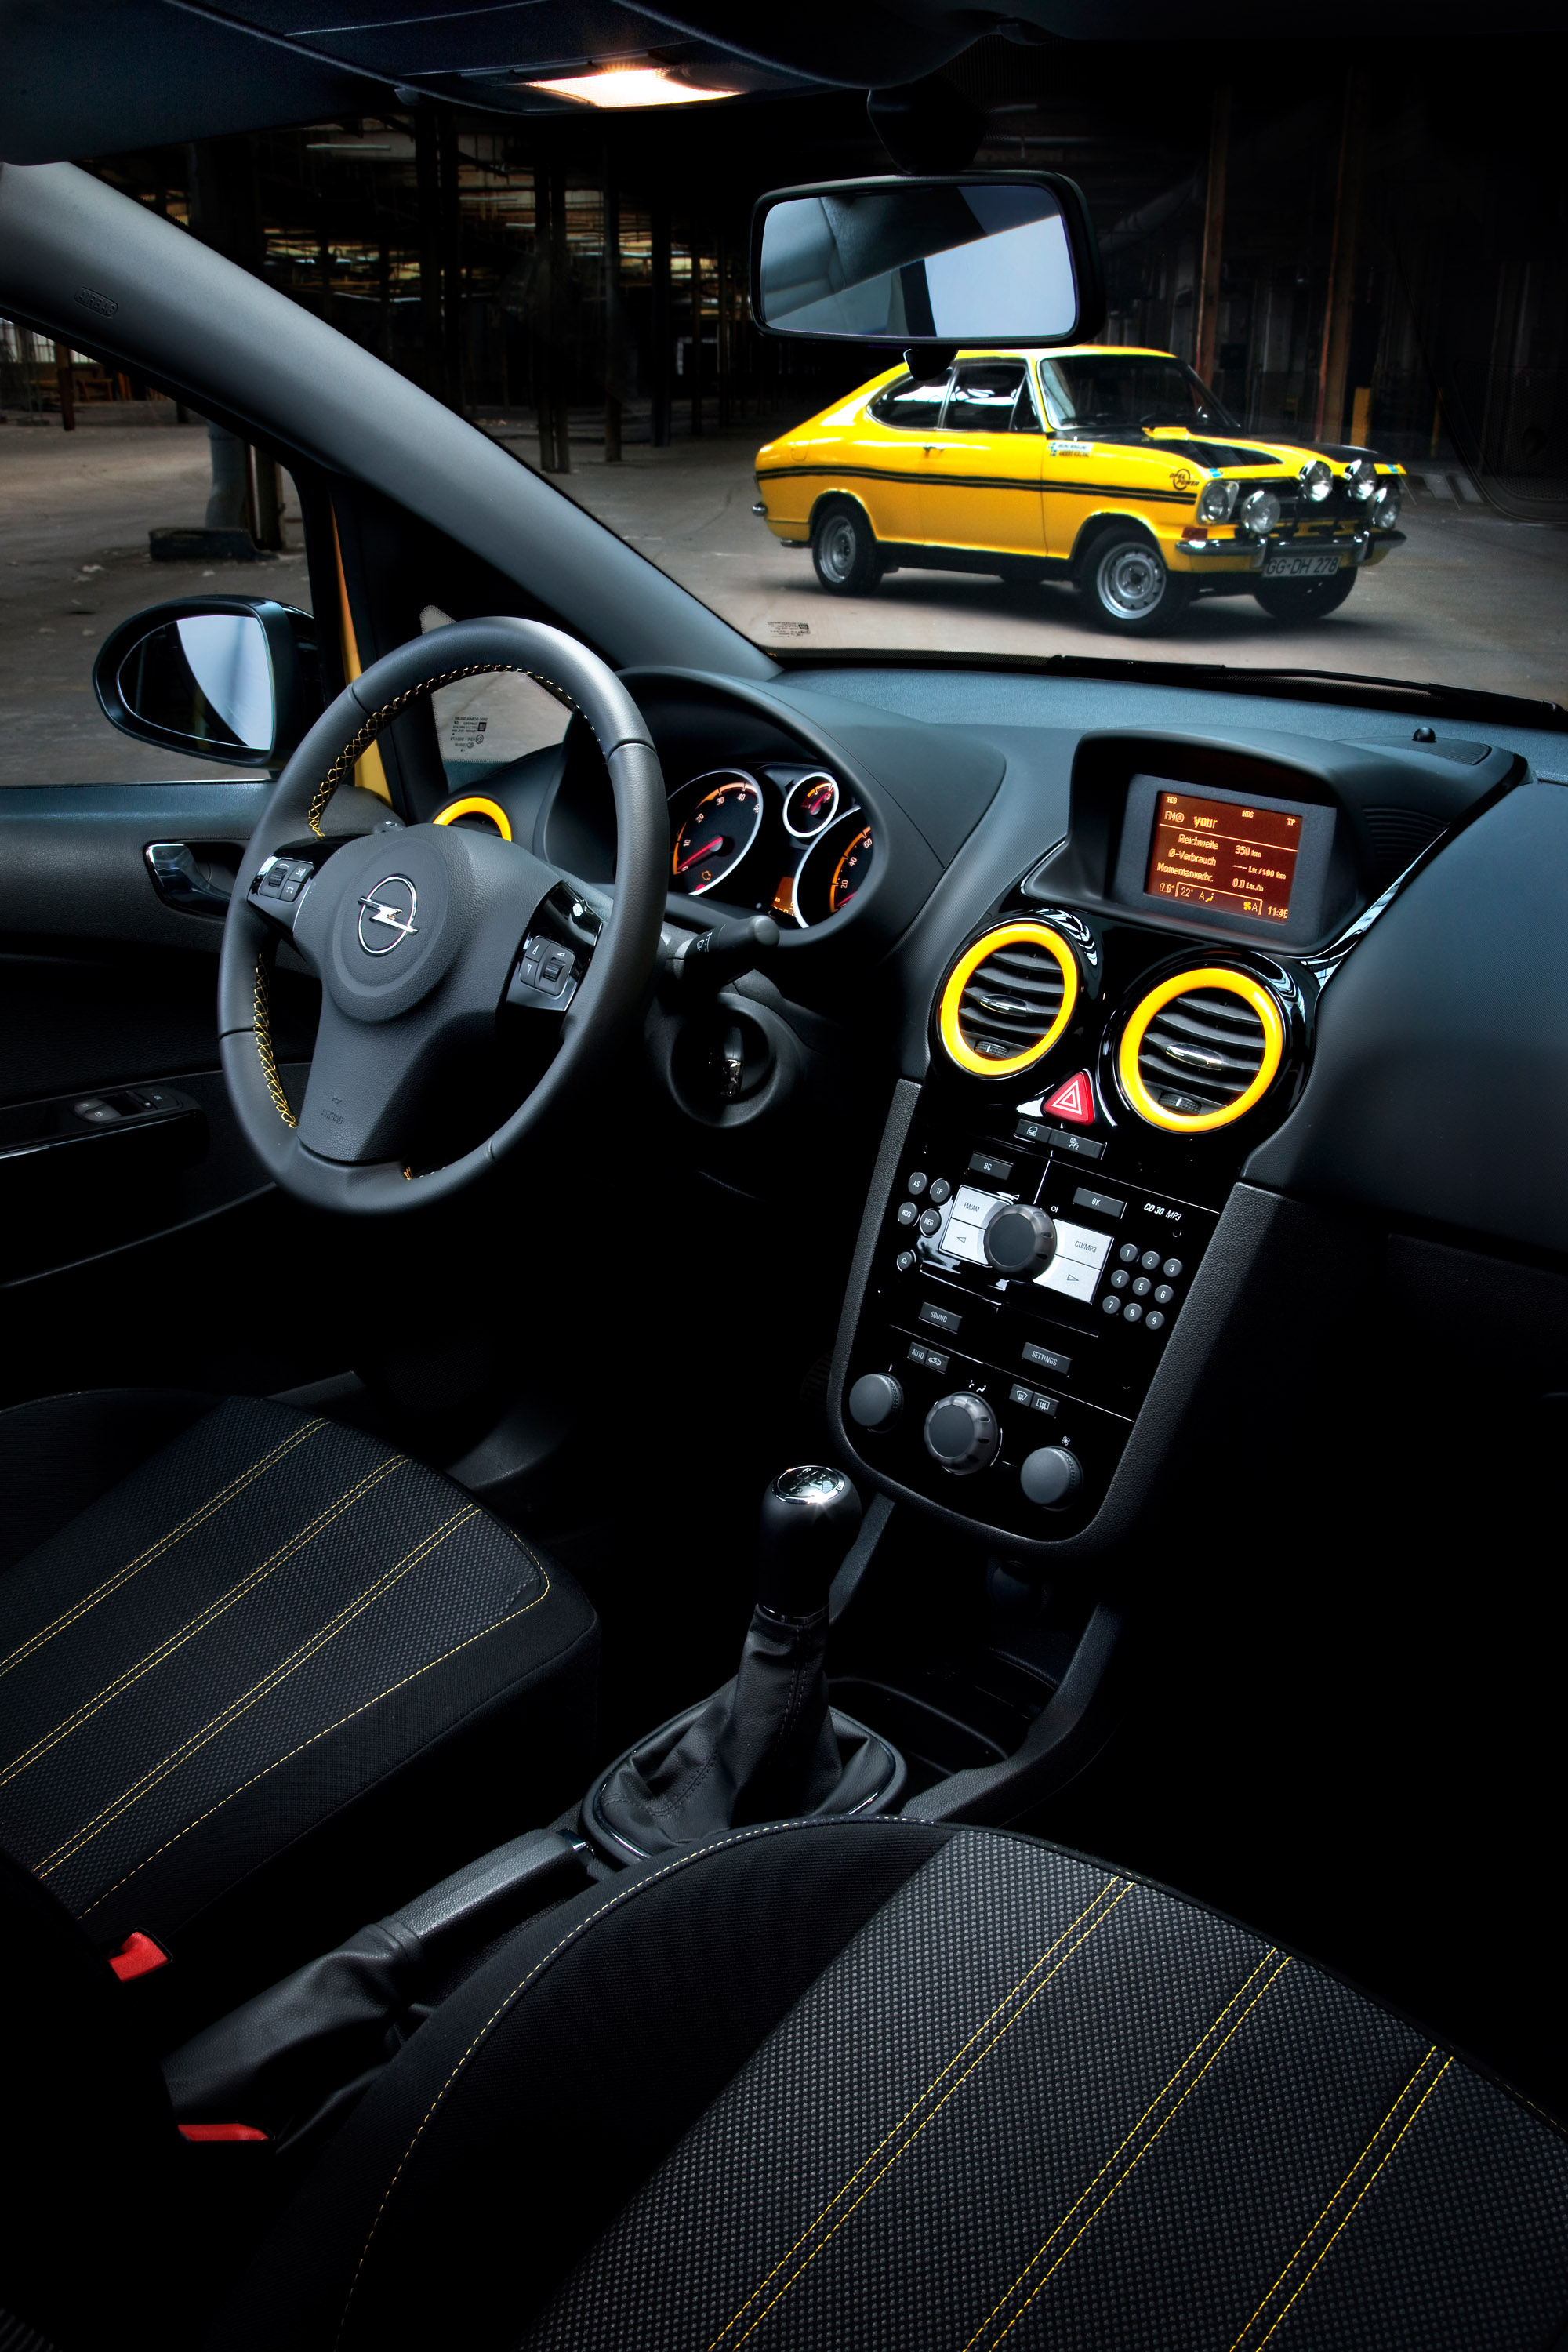 Opel Corsa images (6 of 7)